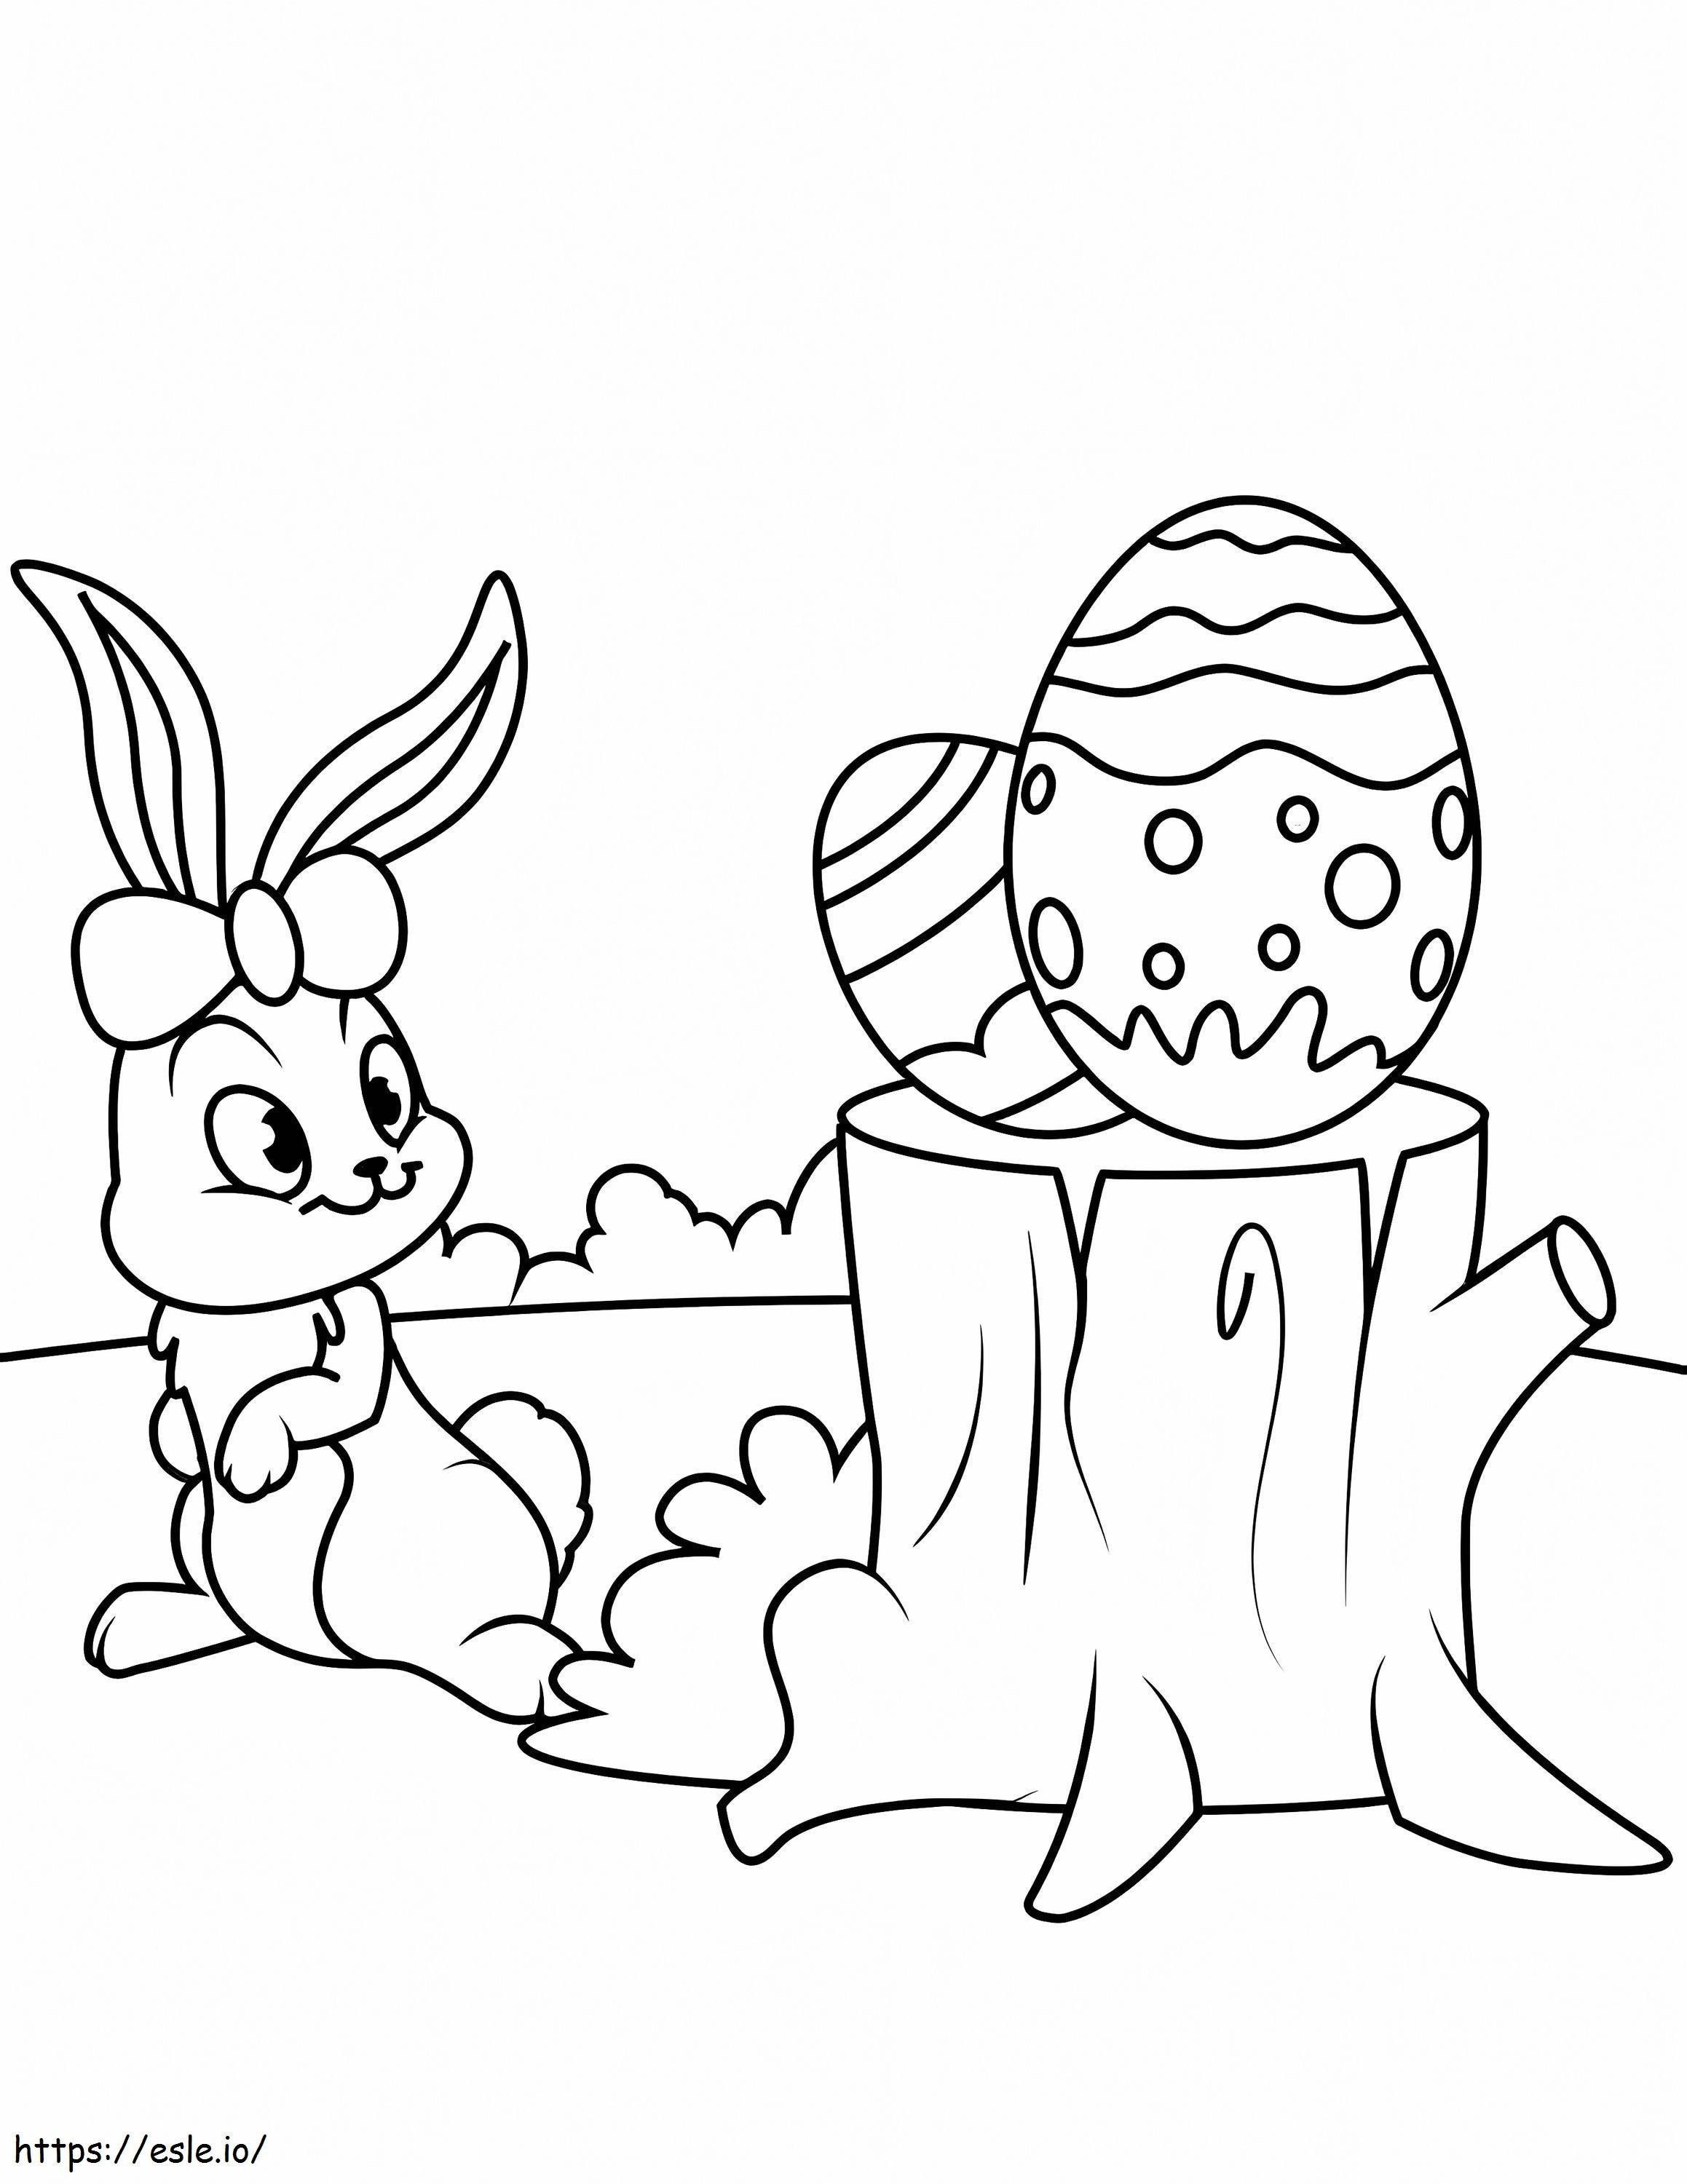 Easter Rabbit With Eggs coloring page